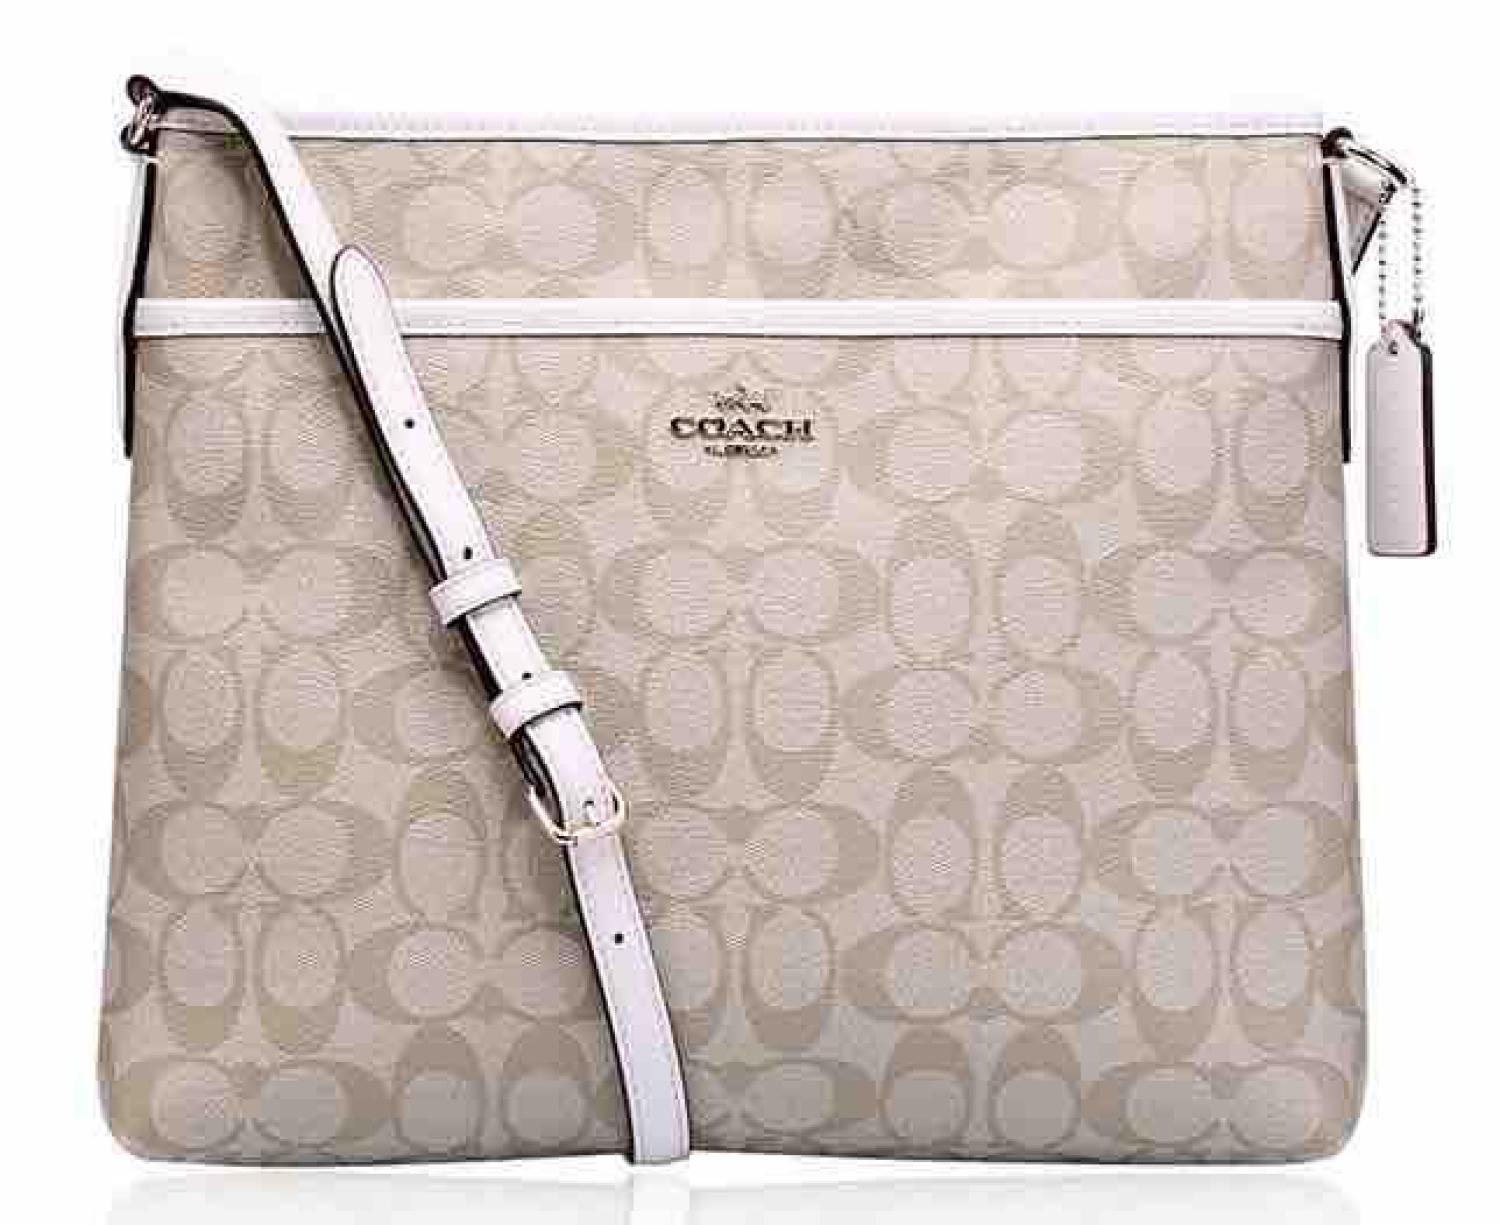 BEST SELLING COACH SLING BAG review and price